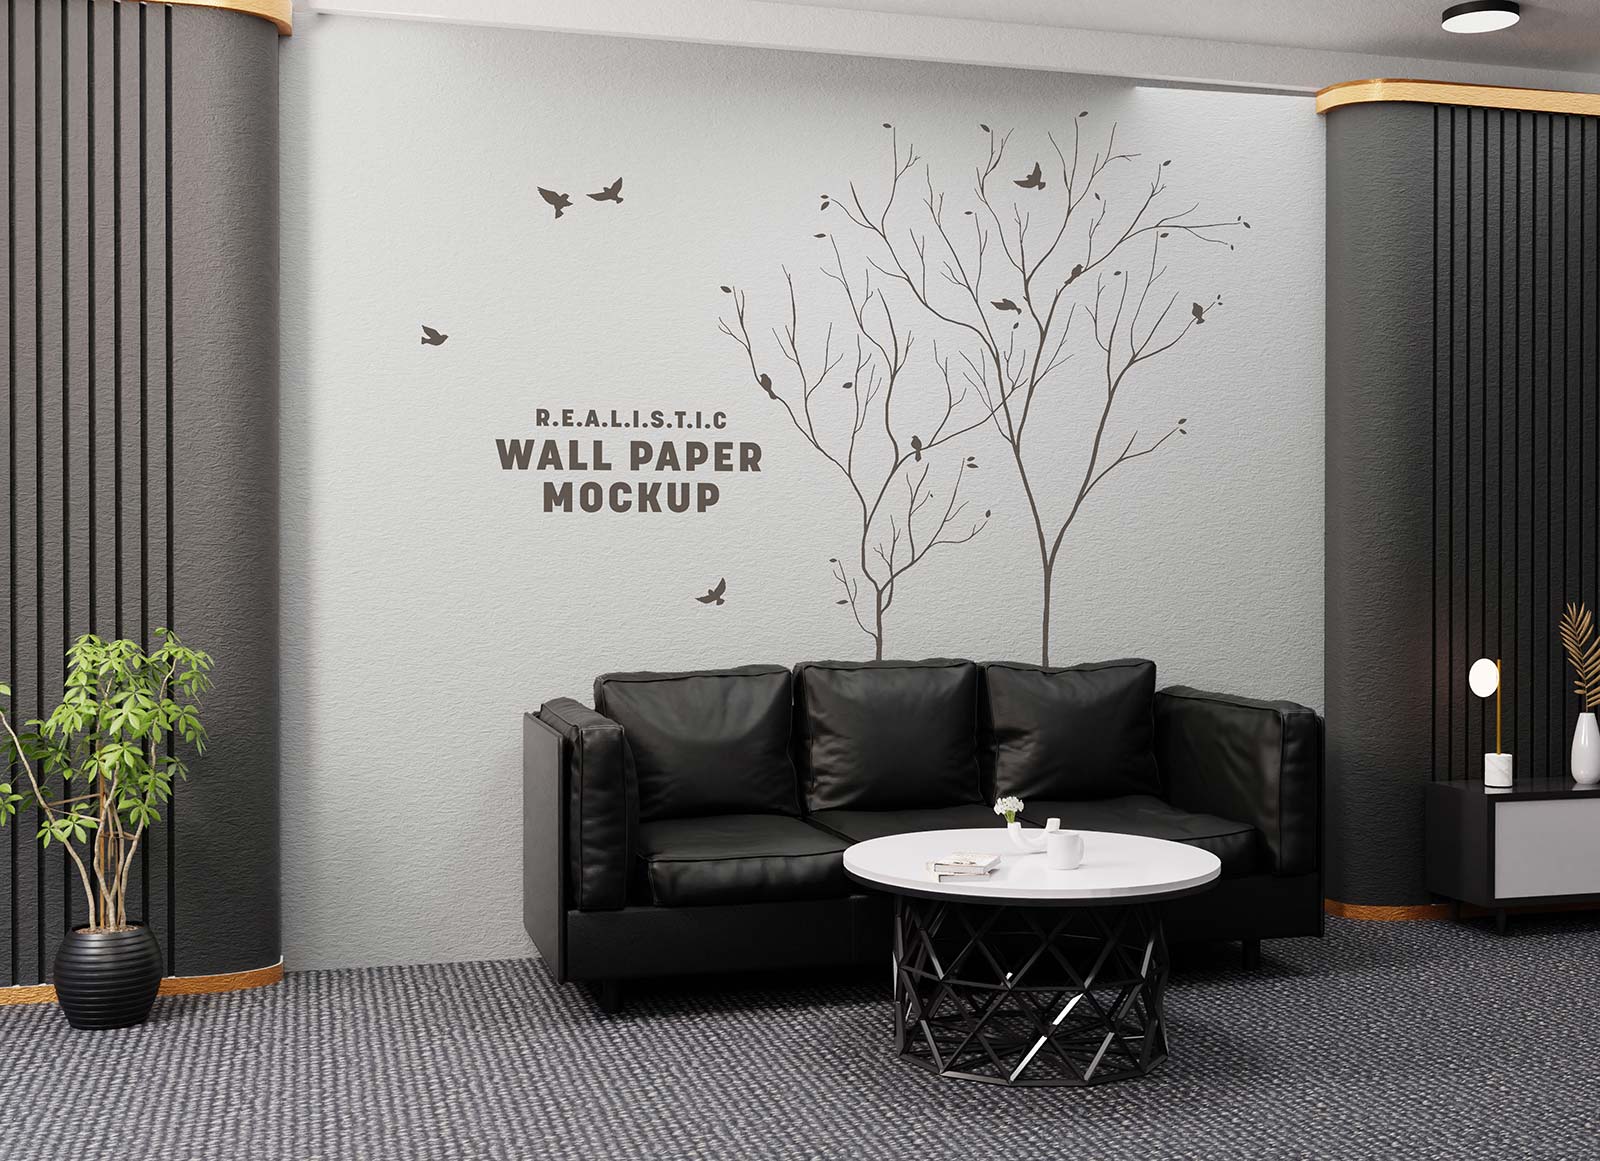 Free Office Lobby Wall Decal / Wall Paper Mockup PSD